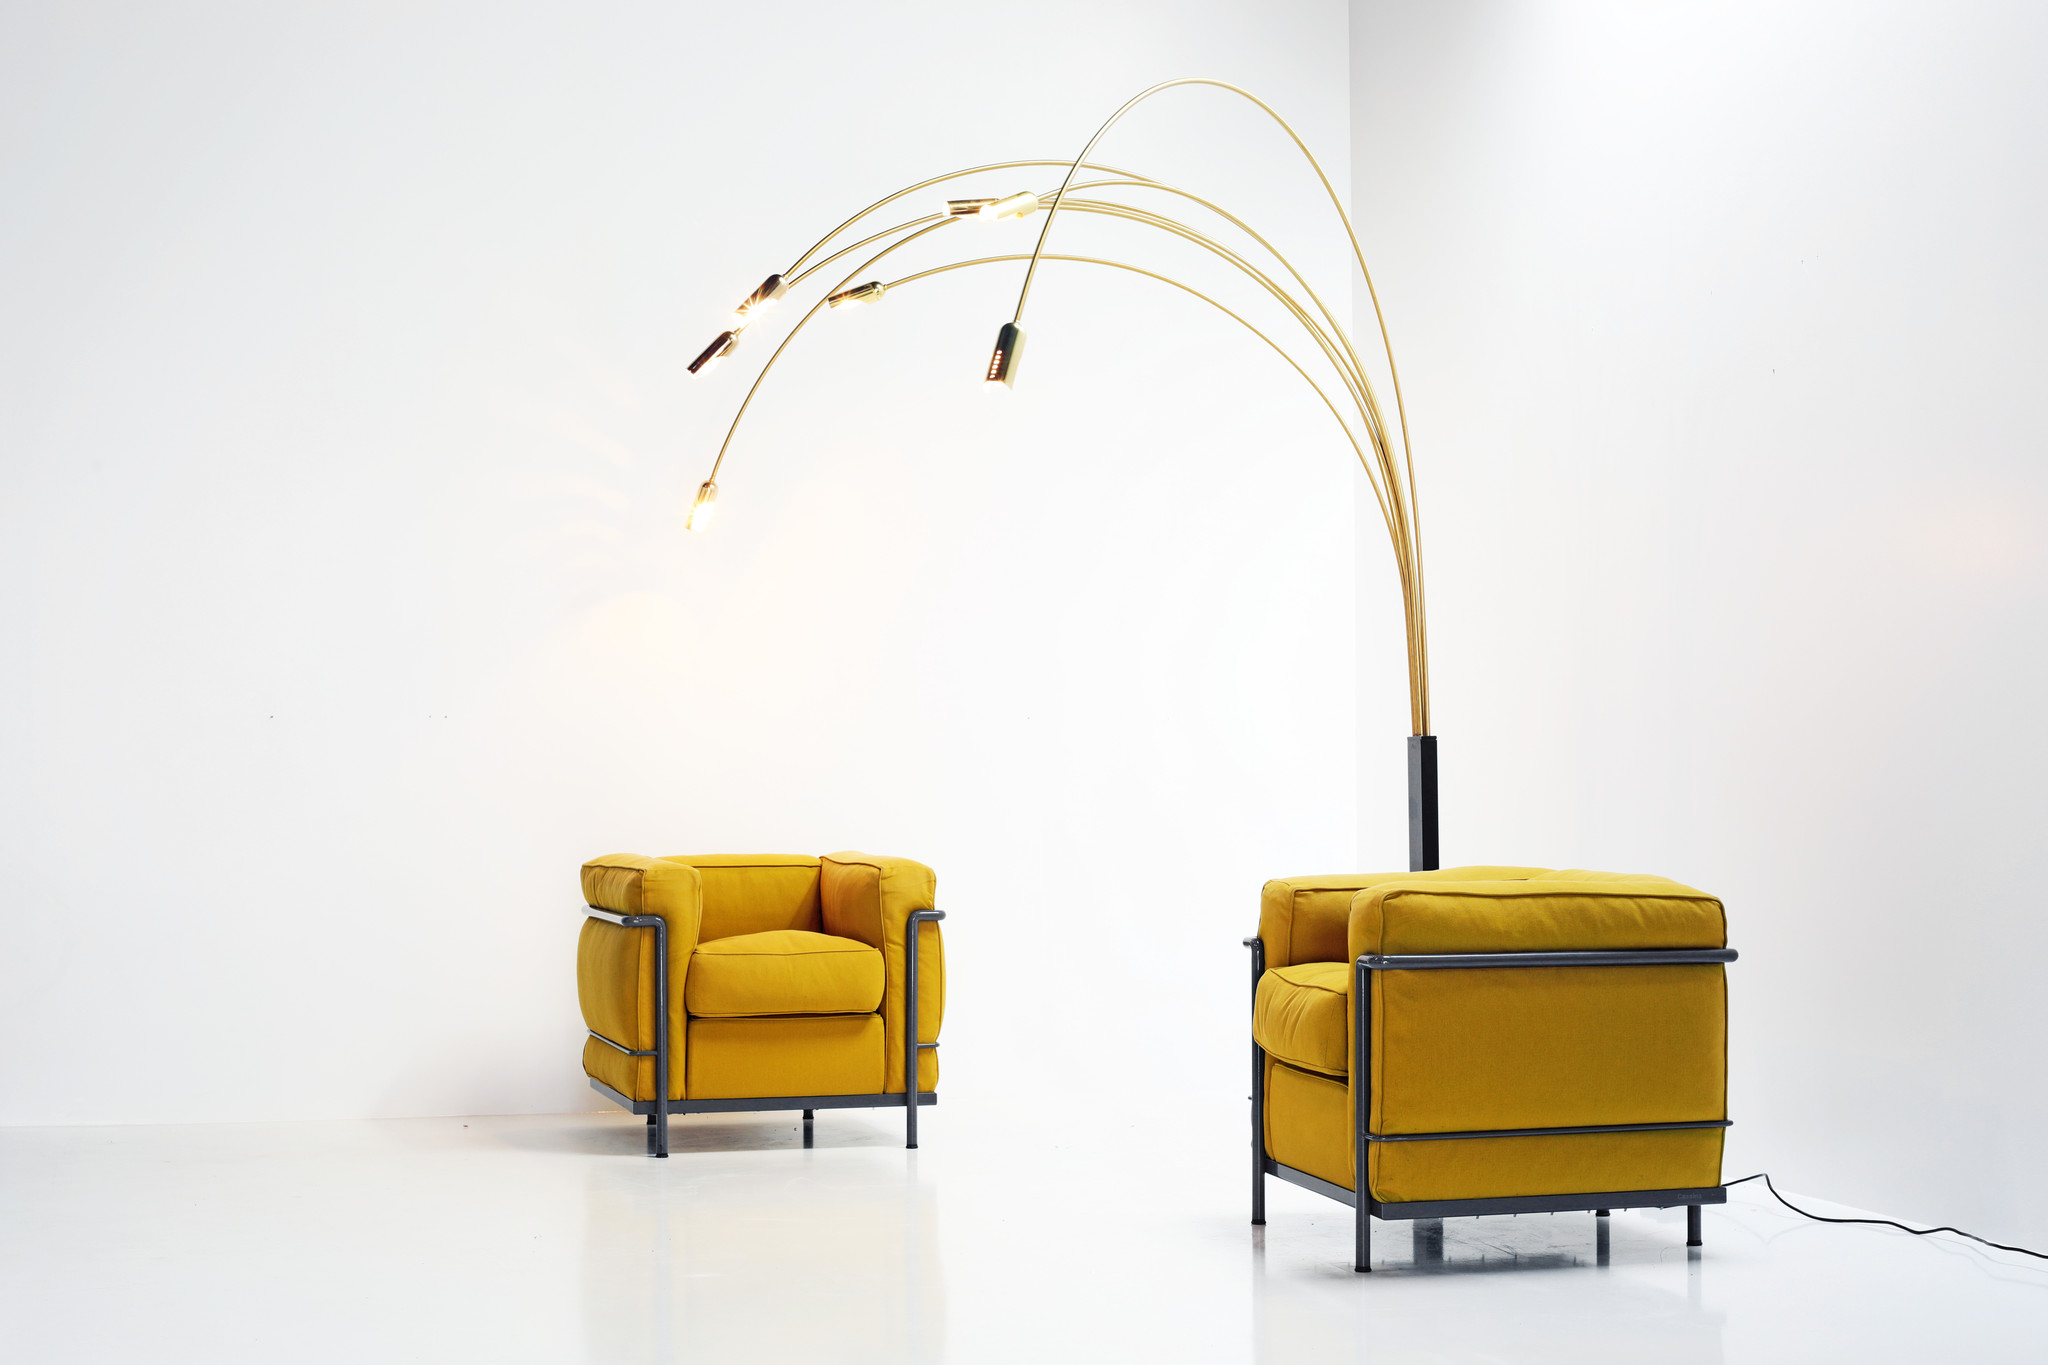 Italian vintage arc lamp with 7 arms